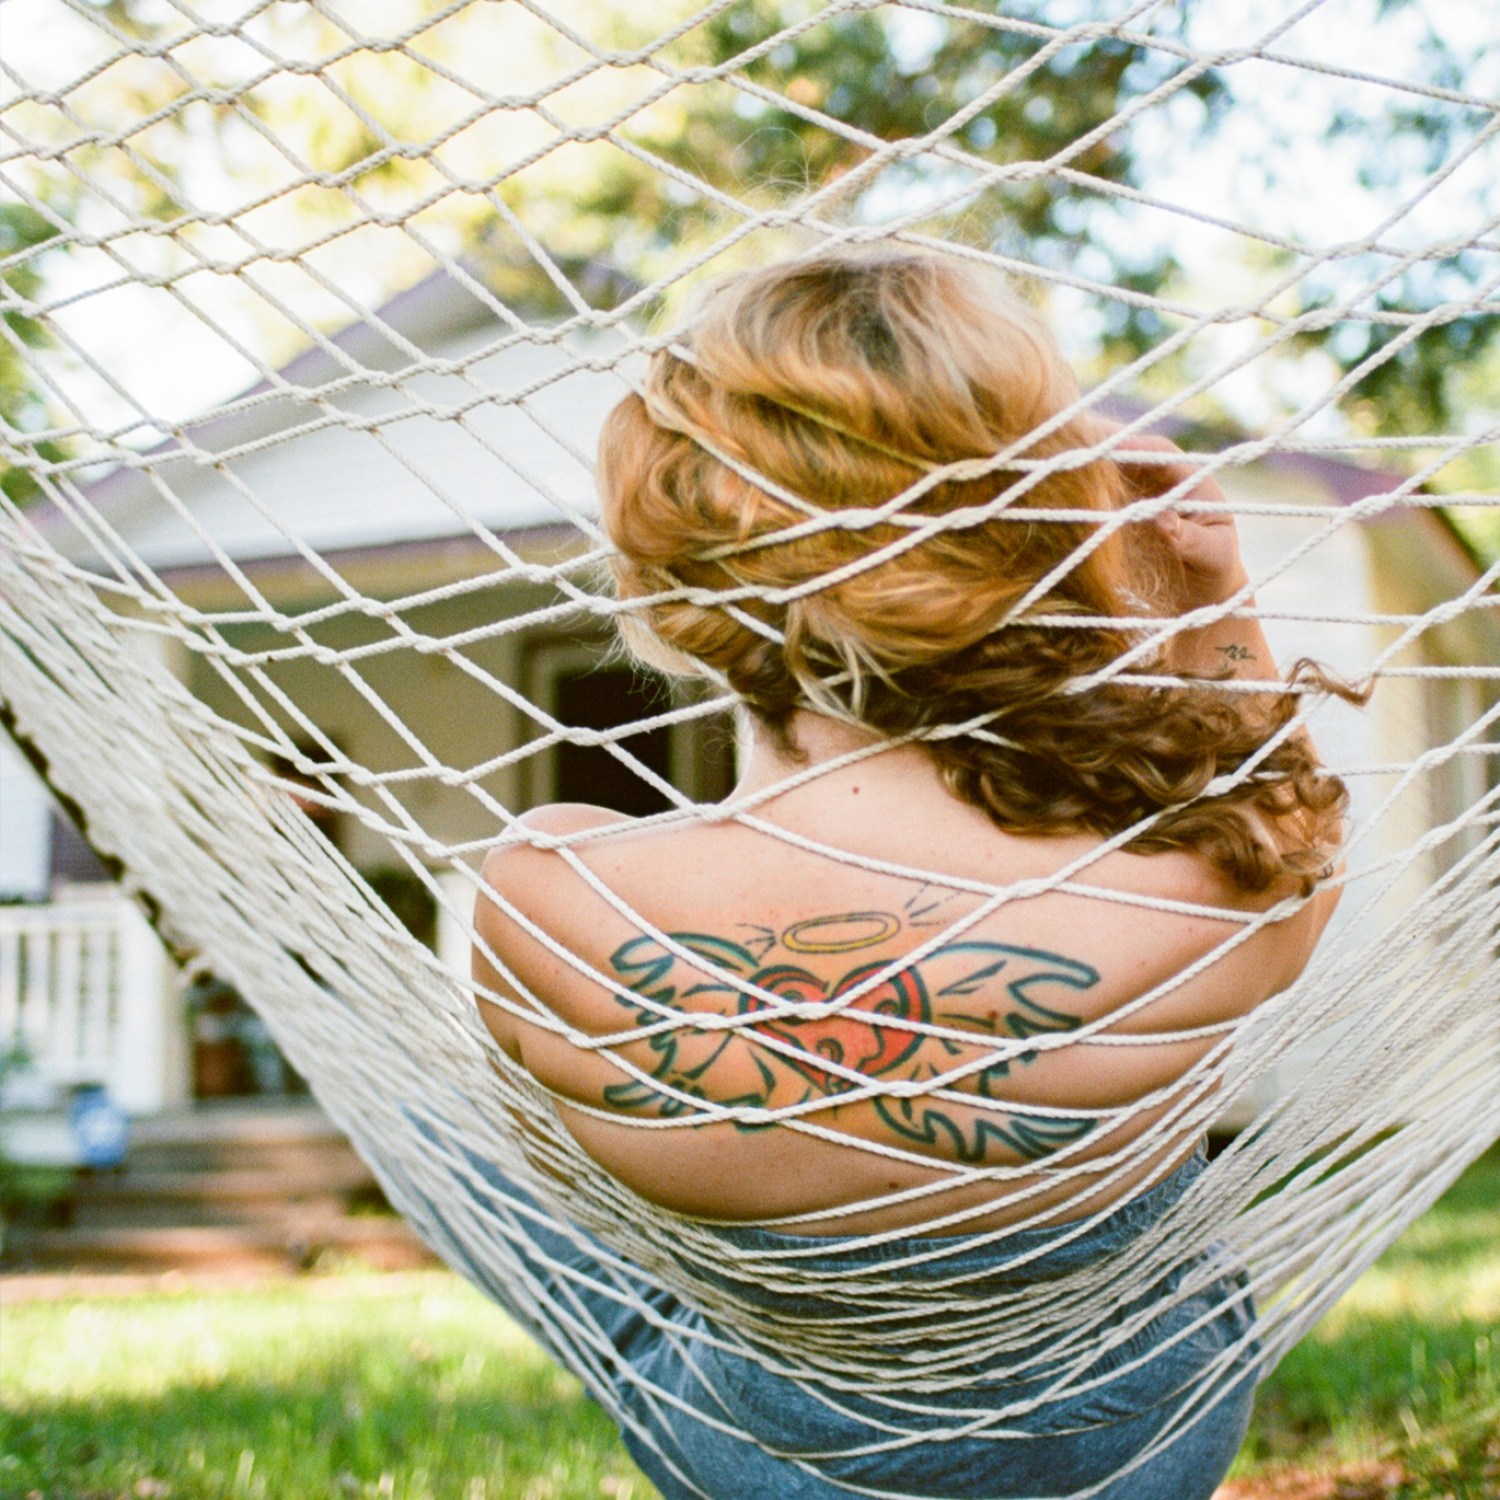 Woman with tattoo relaxing in hammock